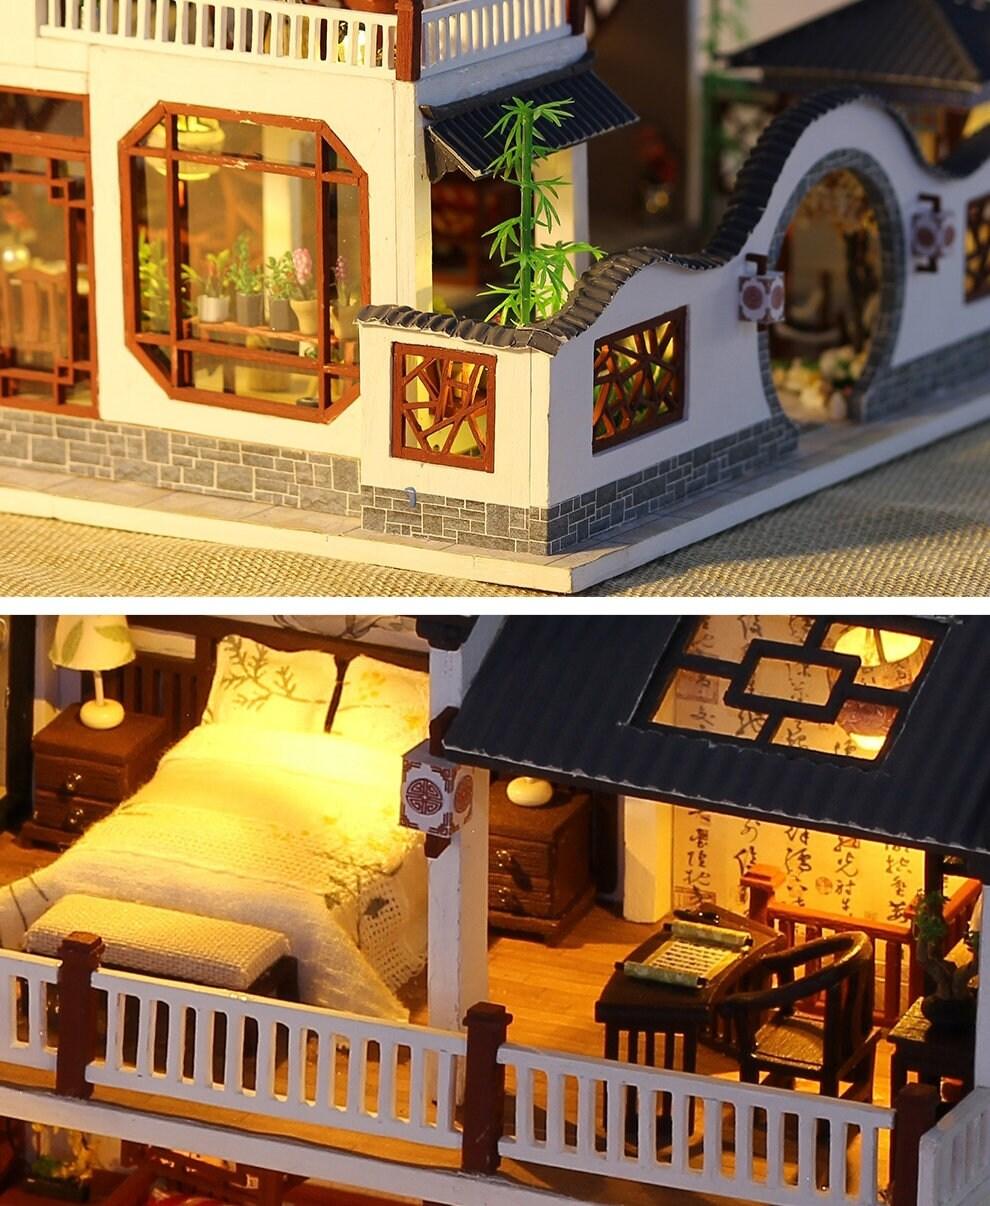 DIY Japanese Dollhouse Ancient Dreame House Traditional Style Wooden Miniature Doll House kit Large Scale with light Adult Craft Gift Decor - Rajbharti Crafts